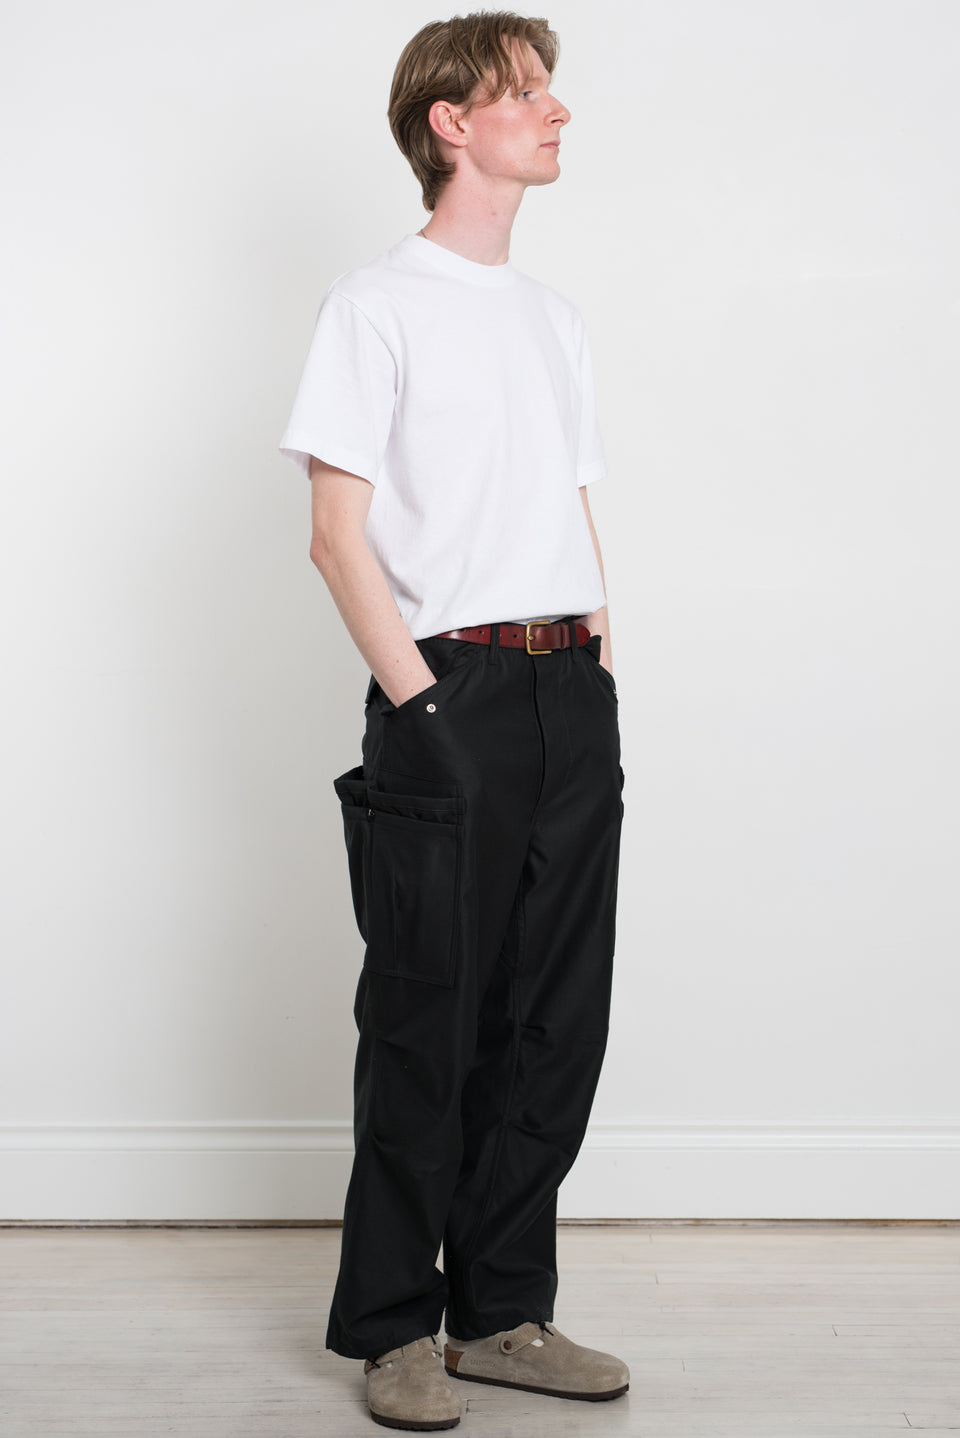 Sassafras SS23 Made in Japan SF-232009 Overgrown Pants Back Satin Black Calculus Victoria BC Canada